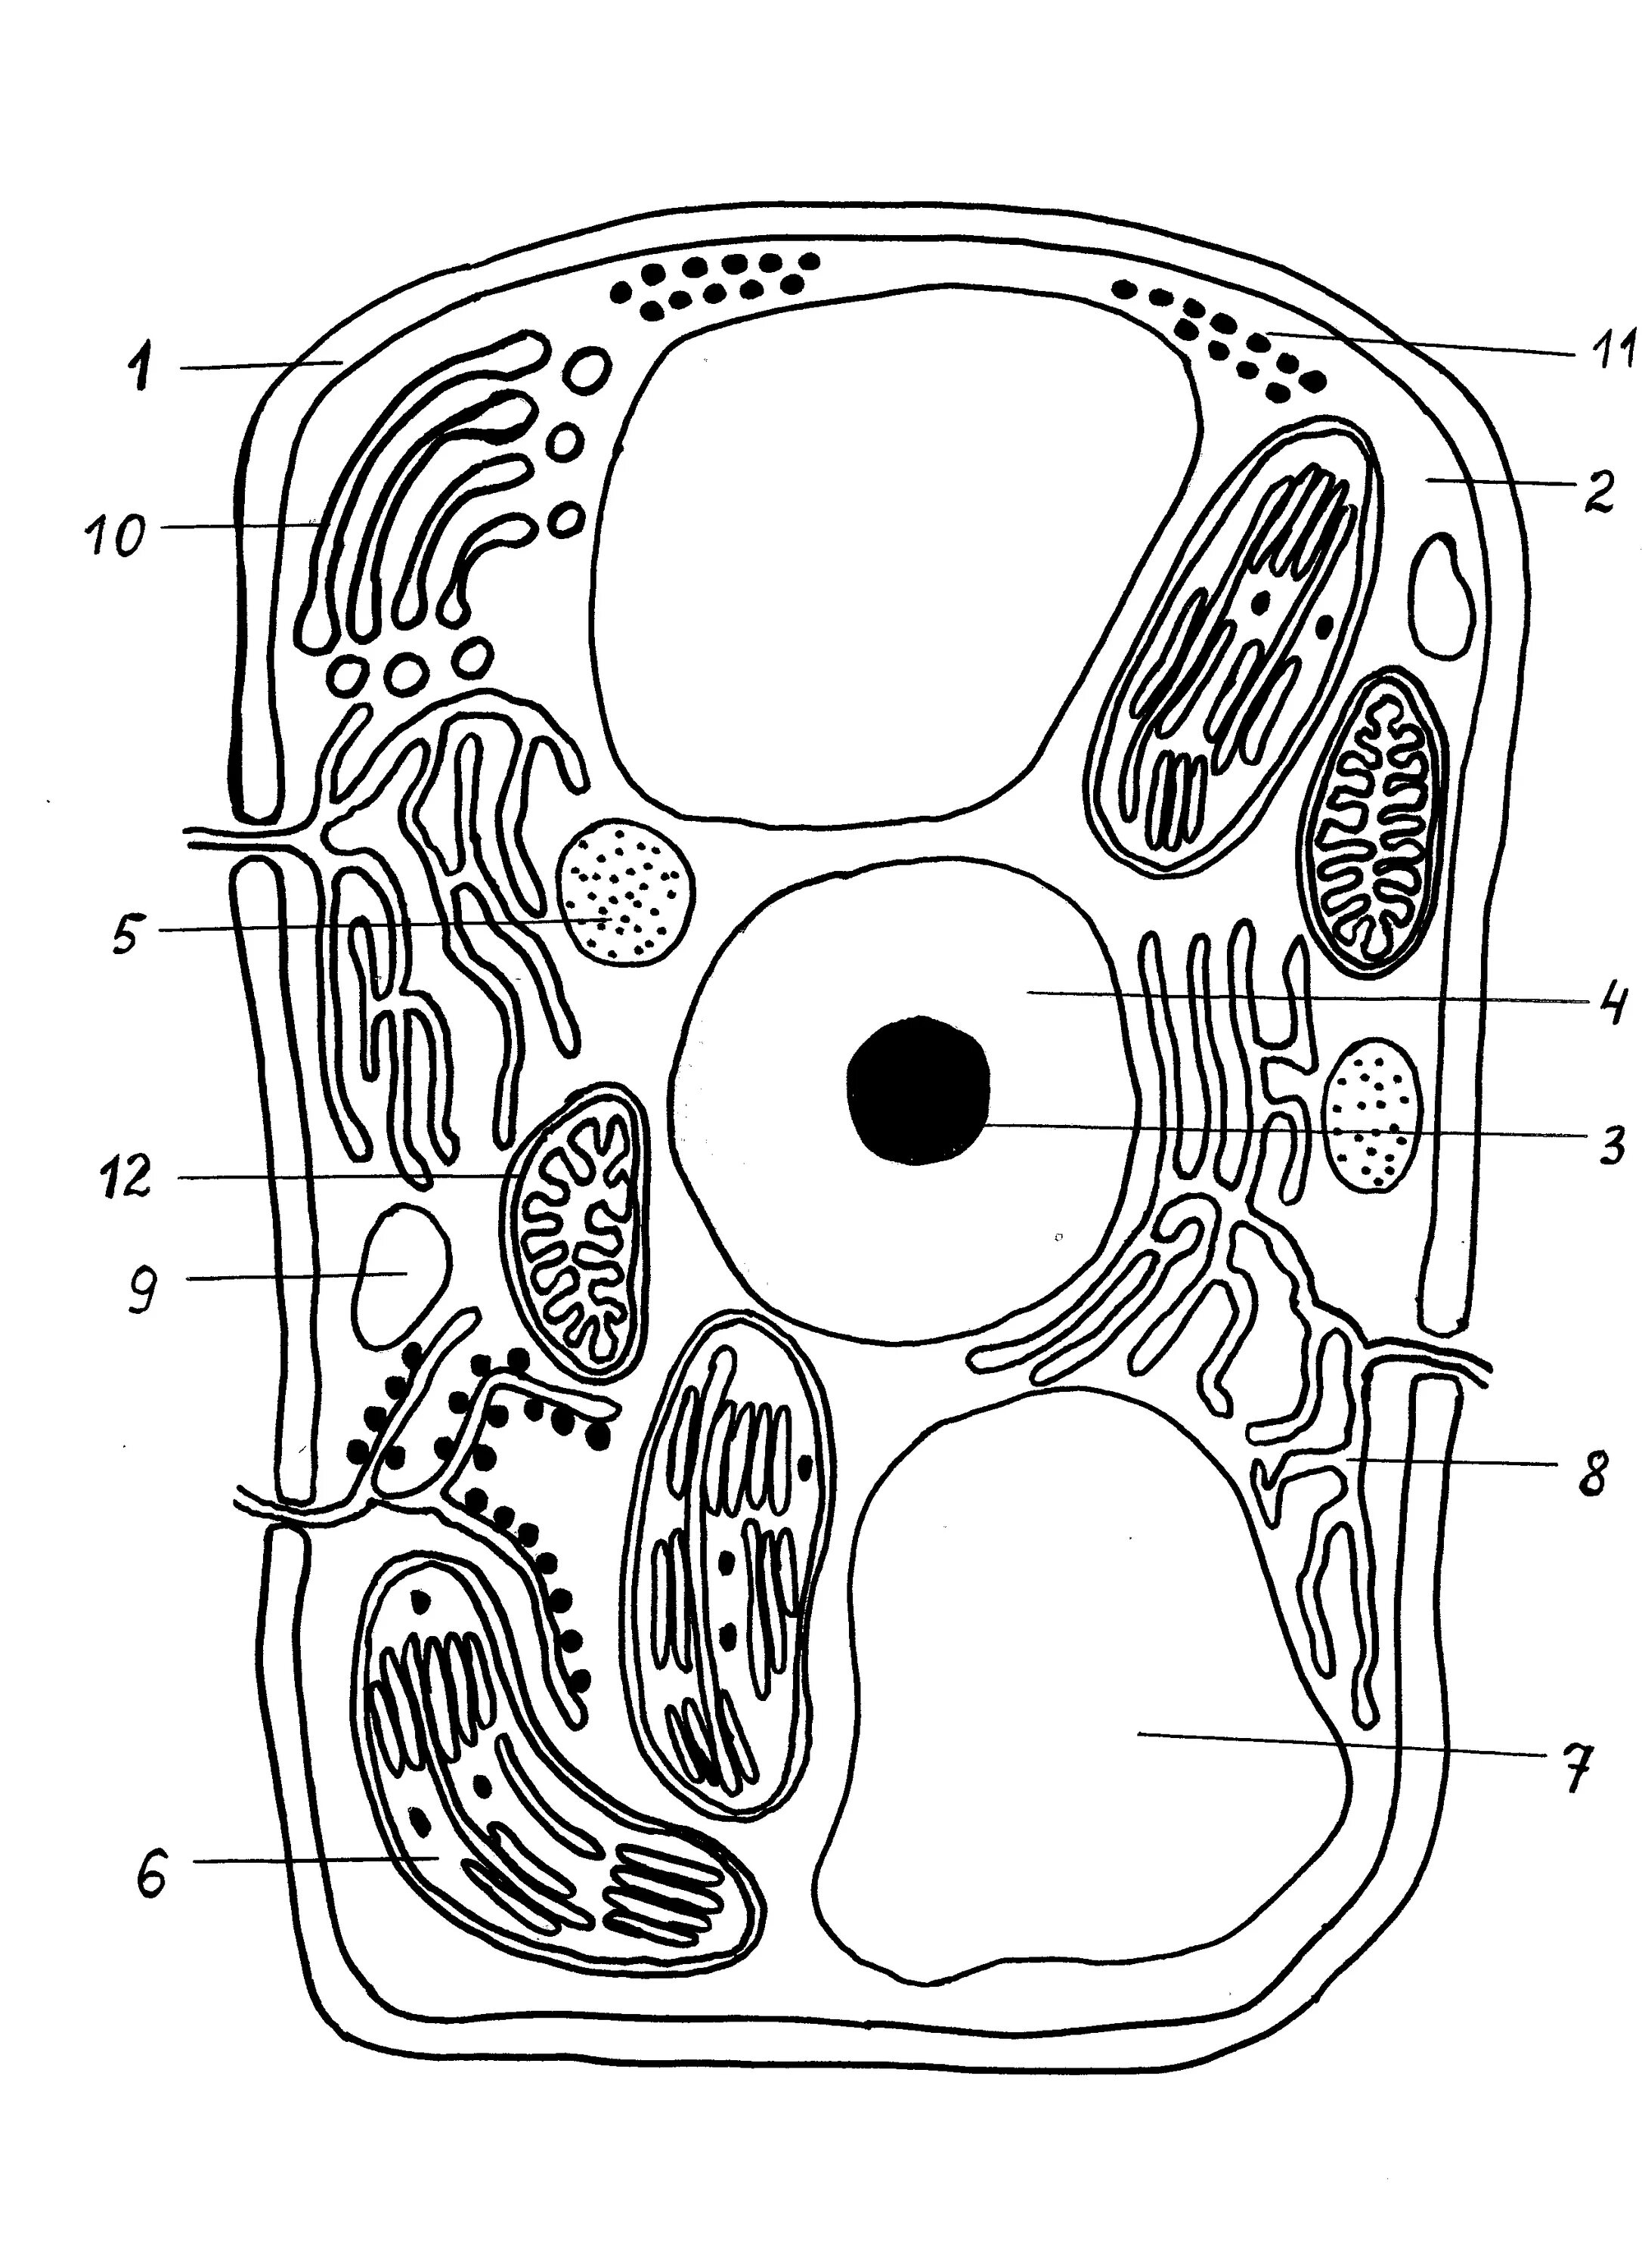 Coloring page of peaceful plant cells